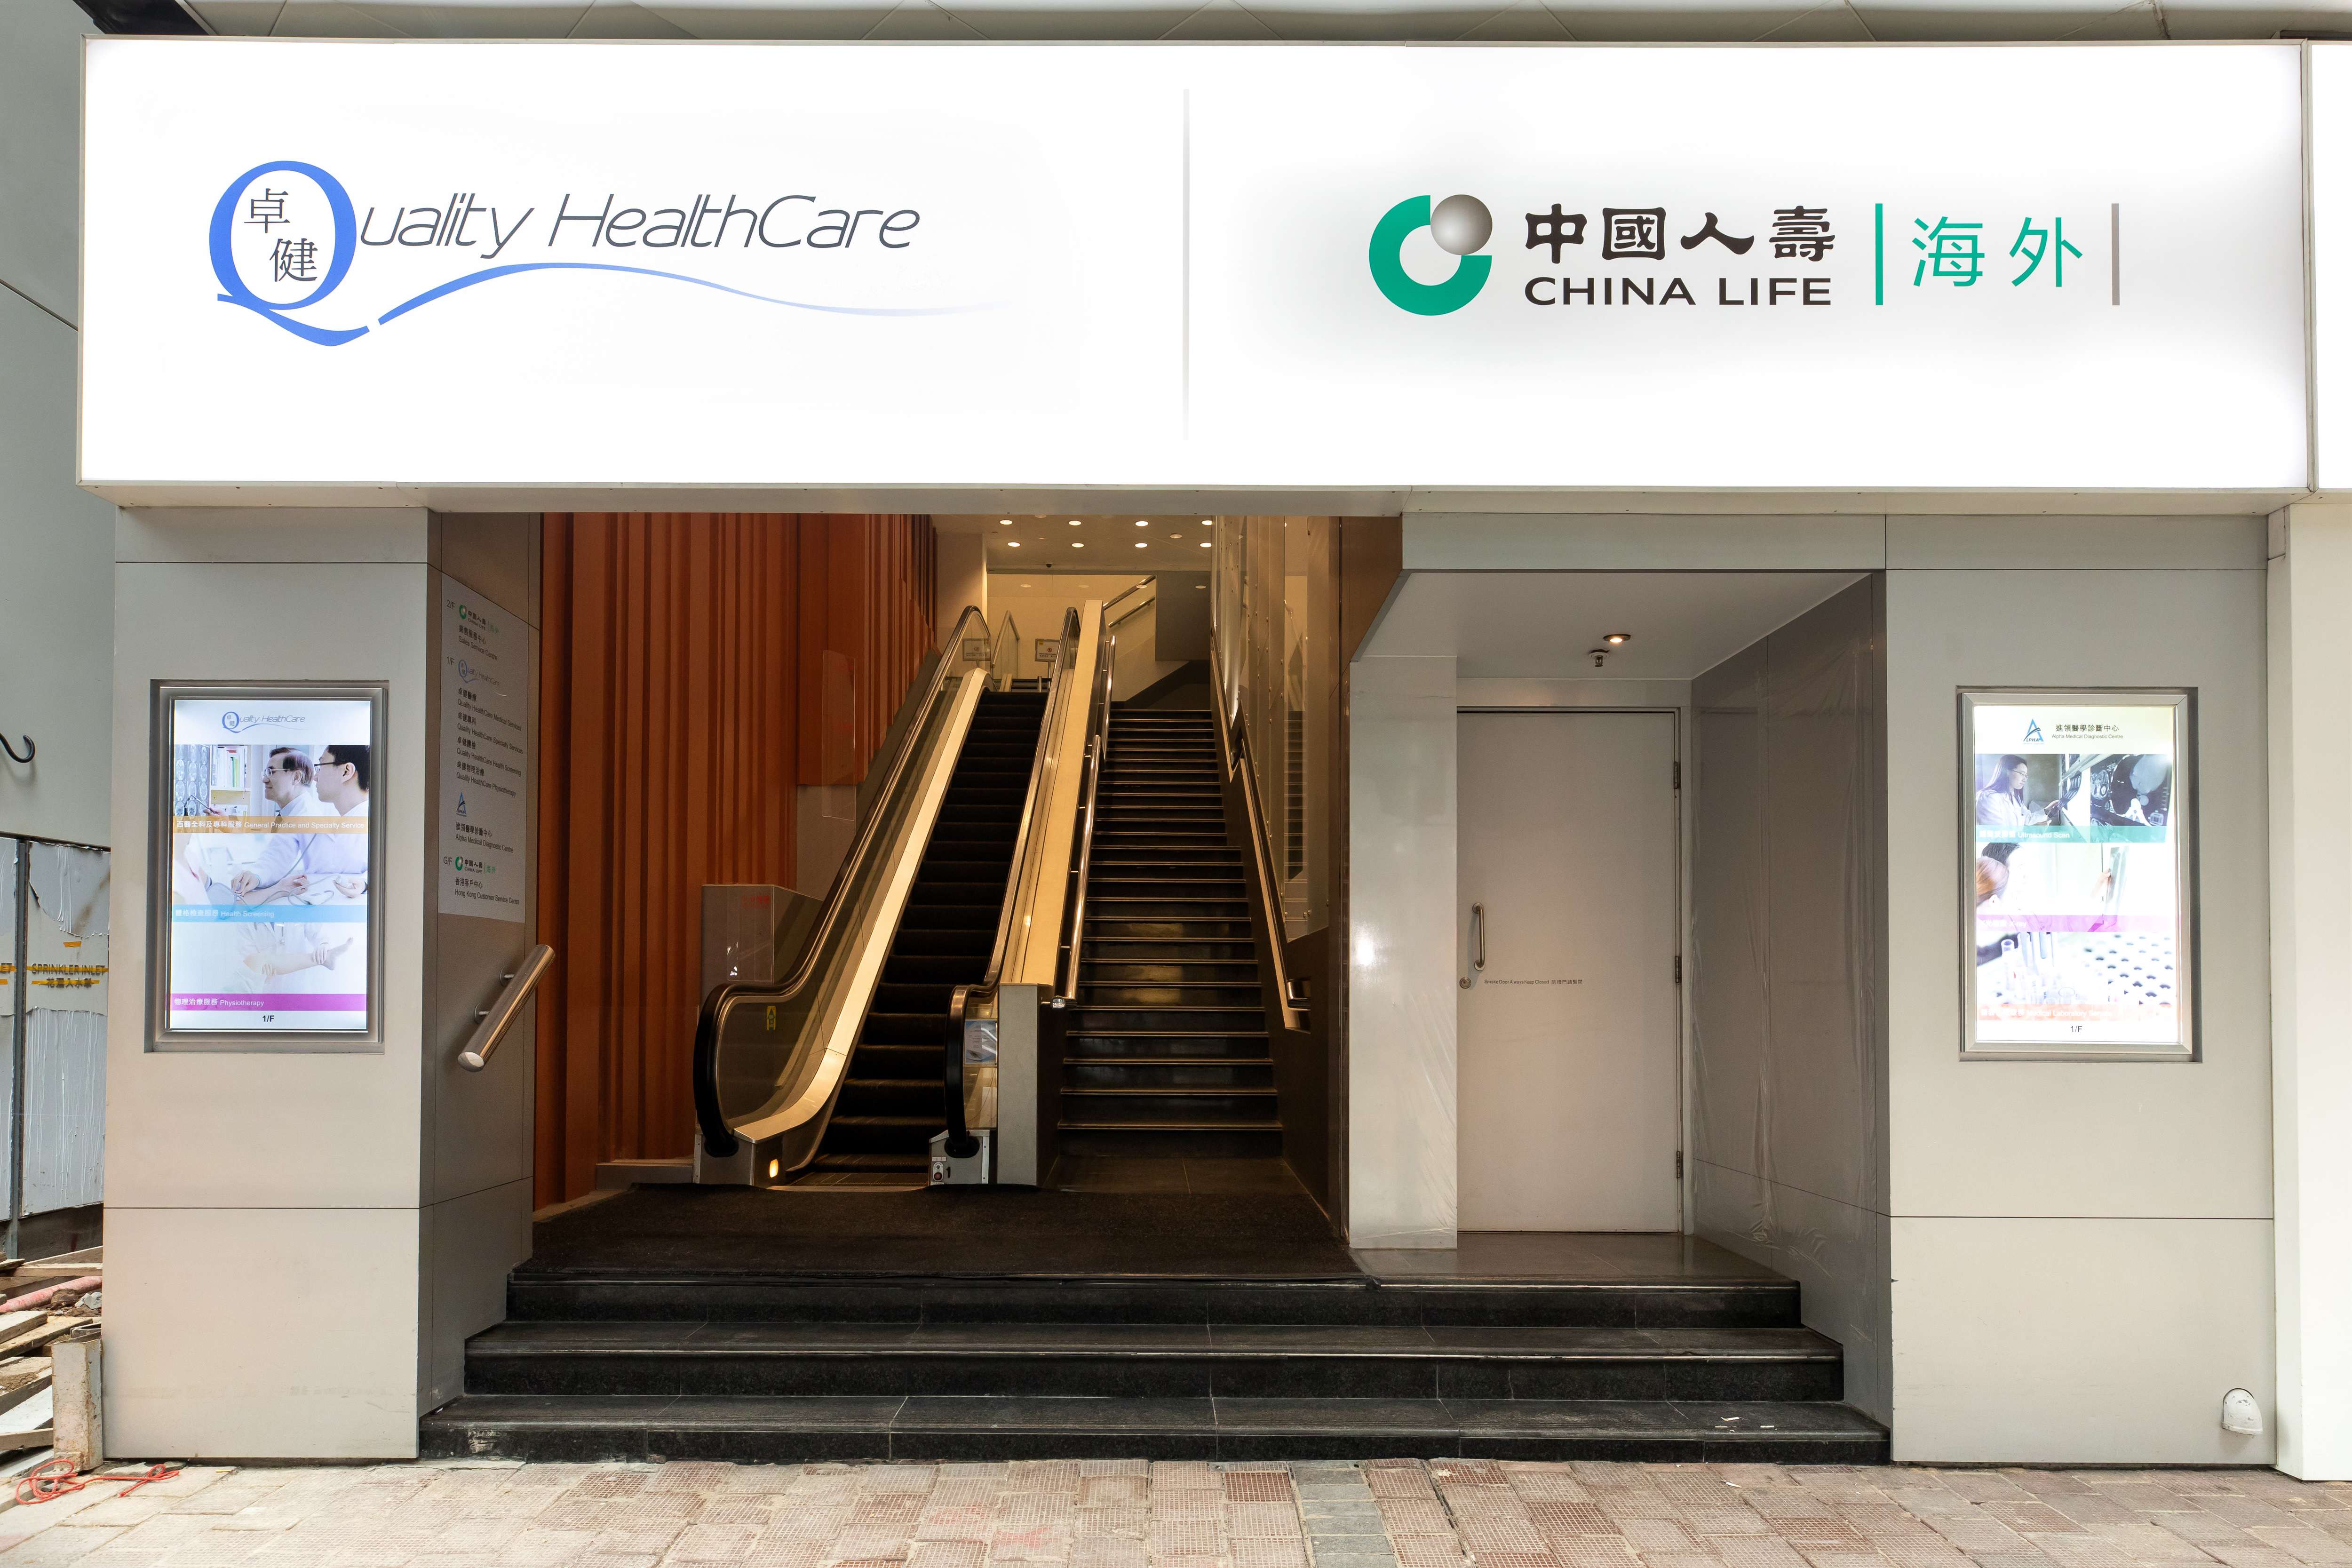 Quality HealthCare Medical Centre and China Life signs above escalator